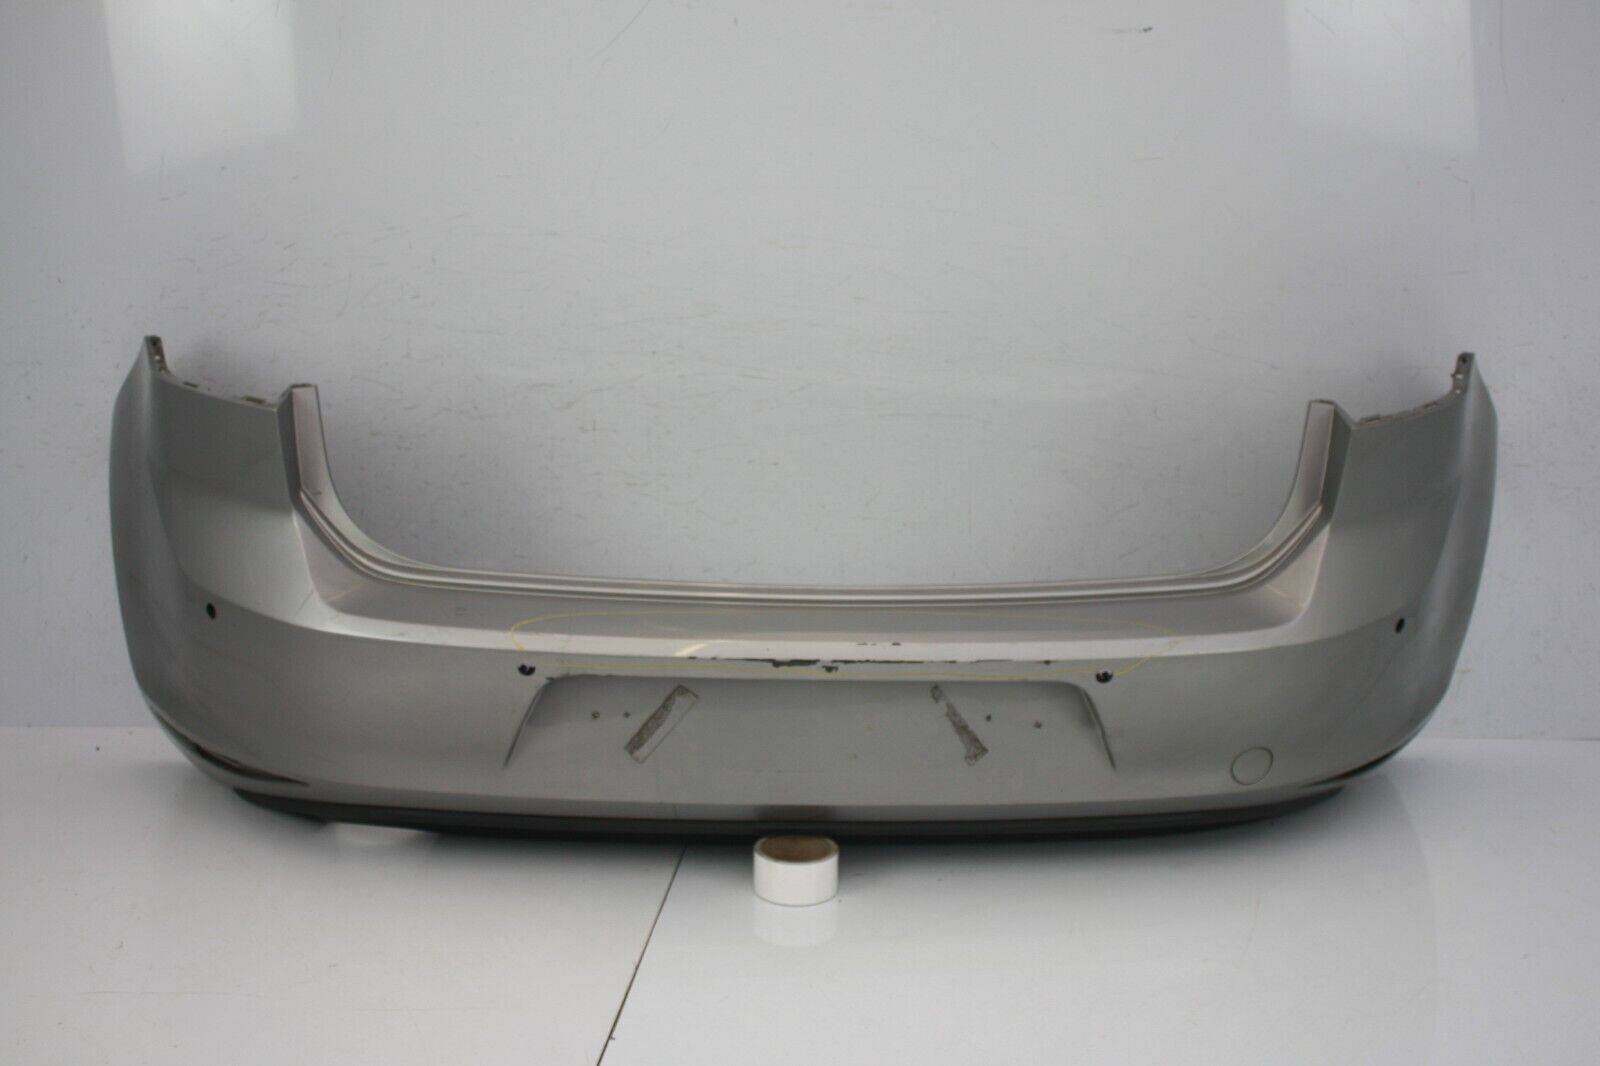 VW Golf Rear Bumper With Diffuser 2013 TO 2017 5G6807421 Genuine 175900320702